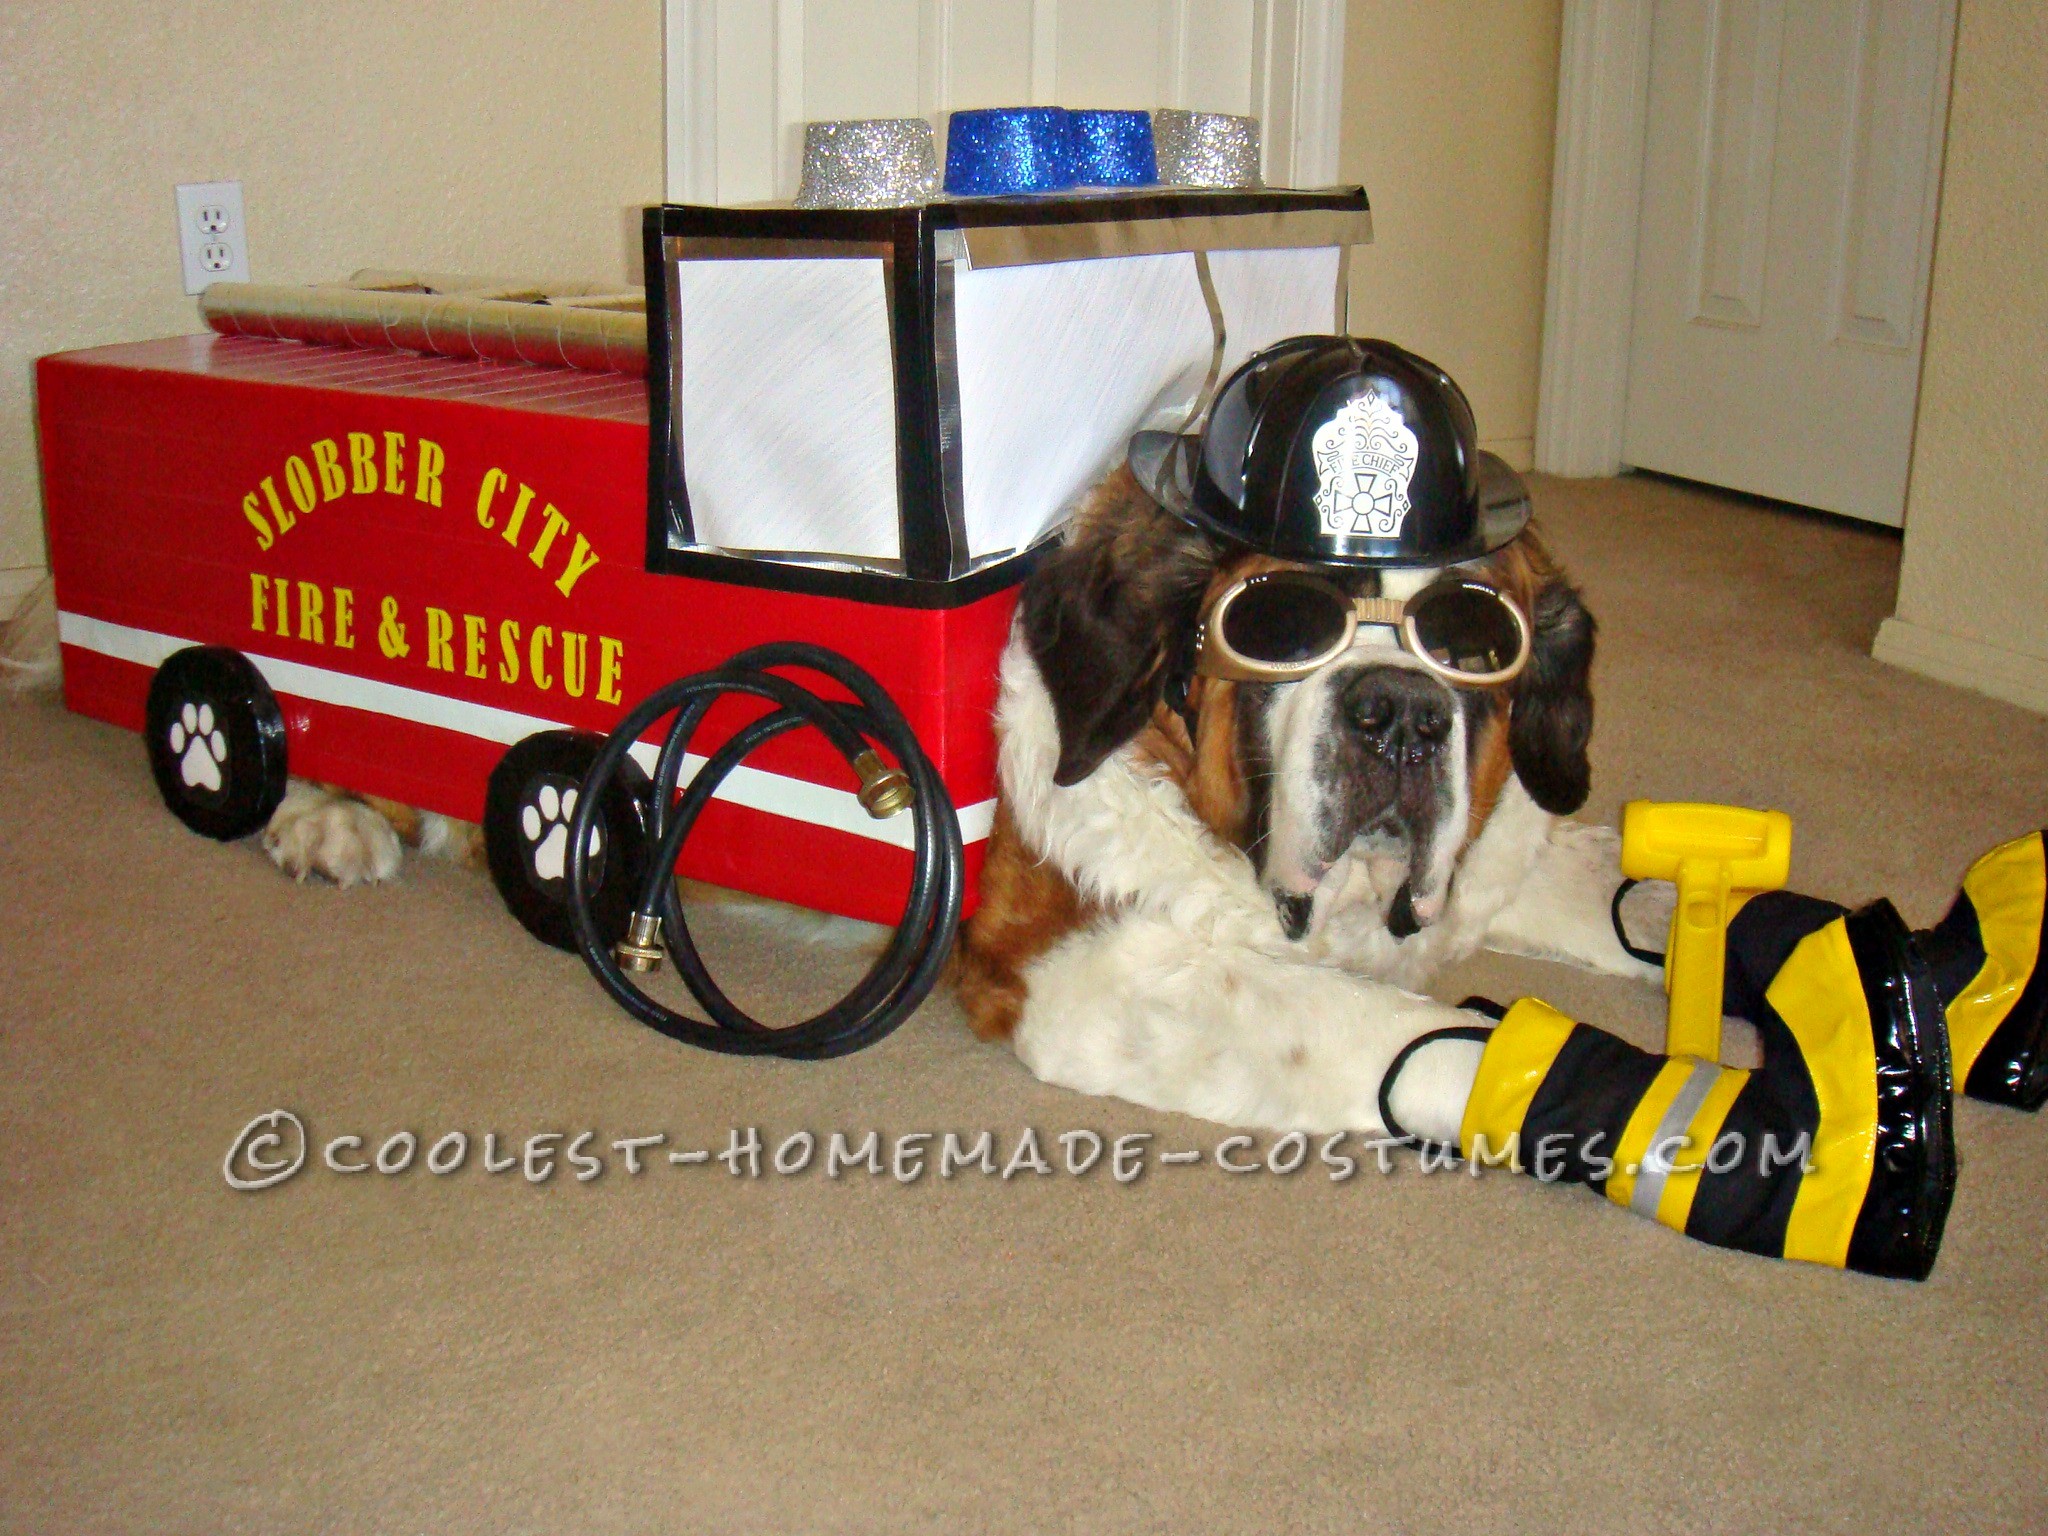 Fire Pawtrol Costume for Snowplow our Dog